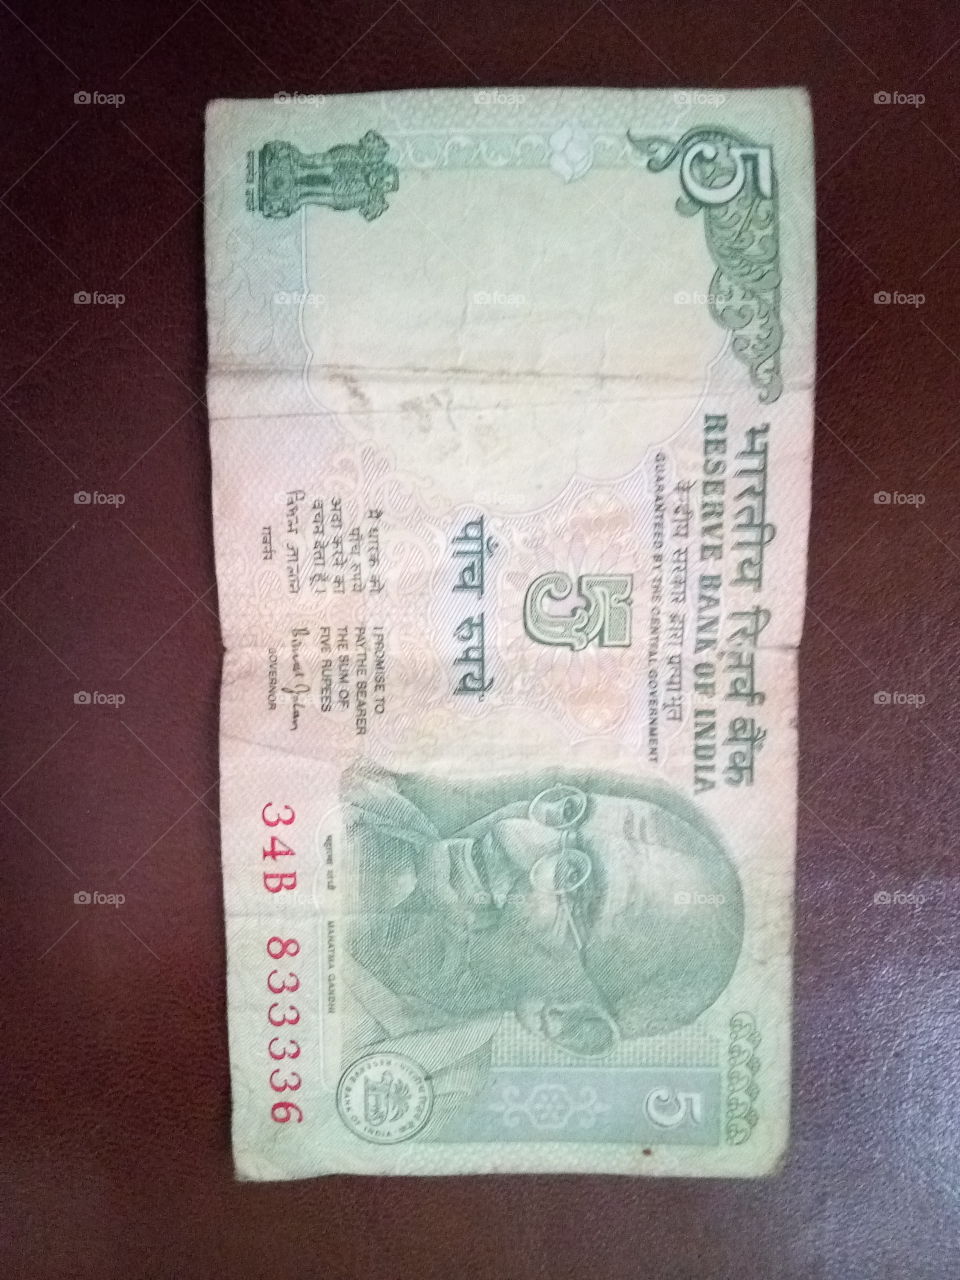 5 rupee Indian currency note with unique number